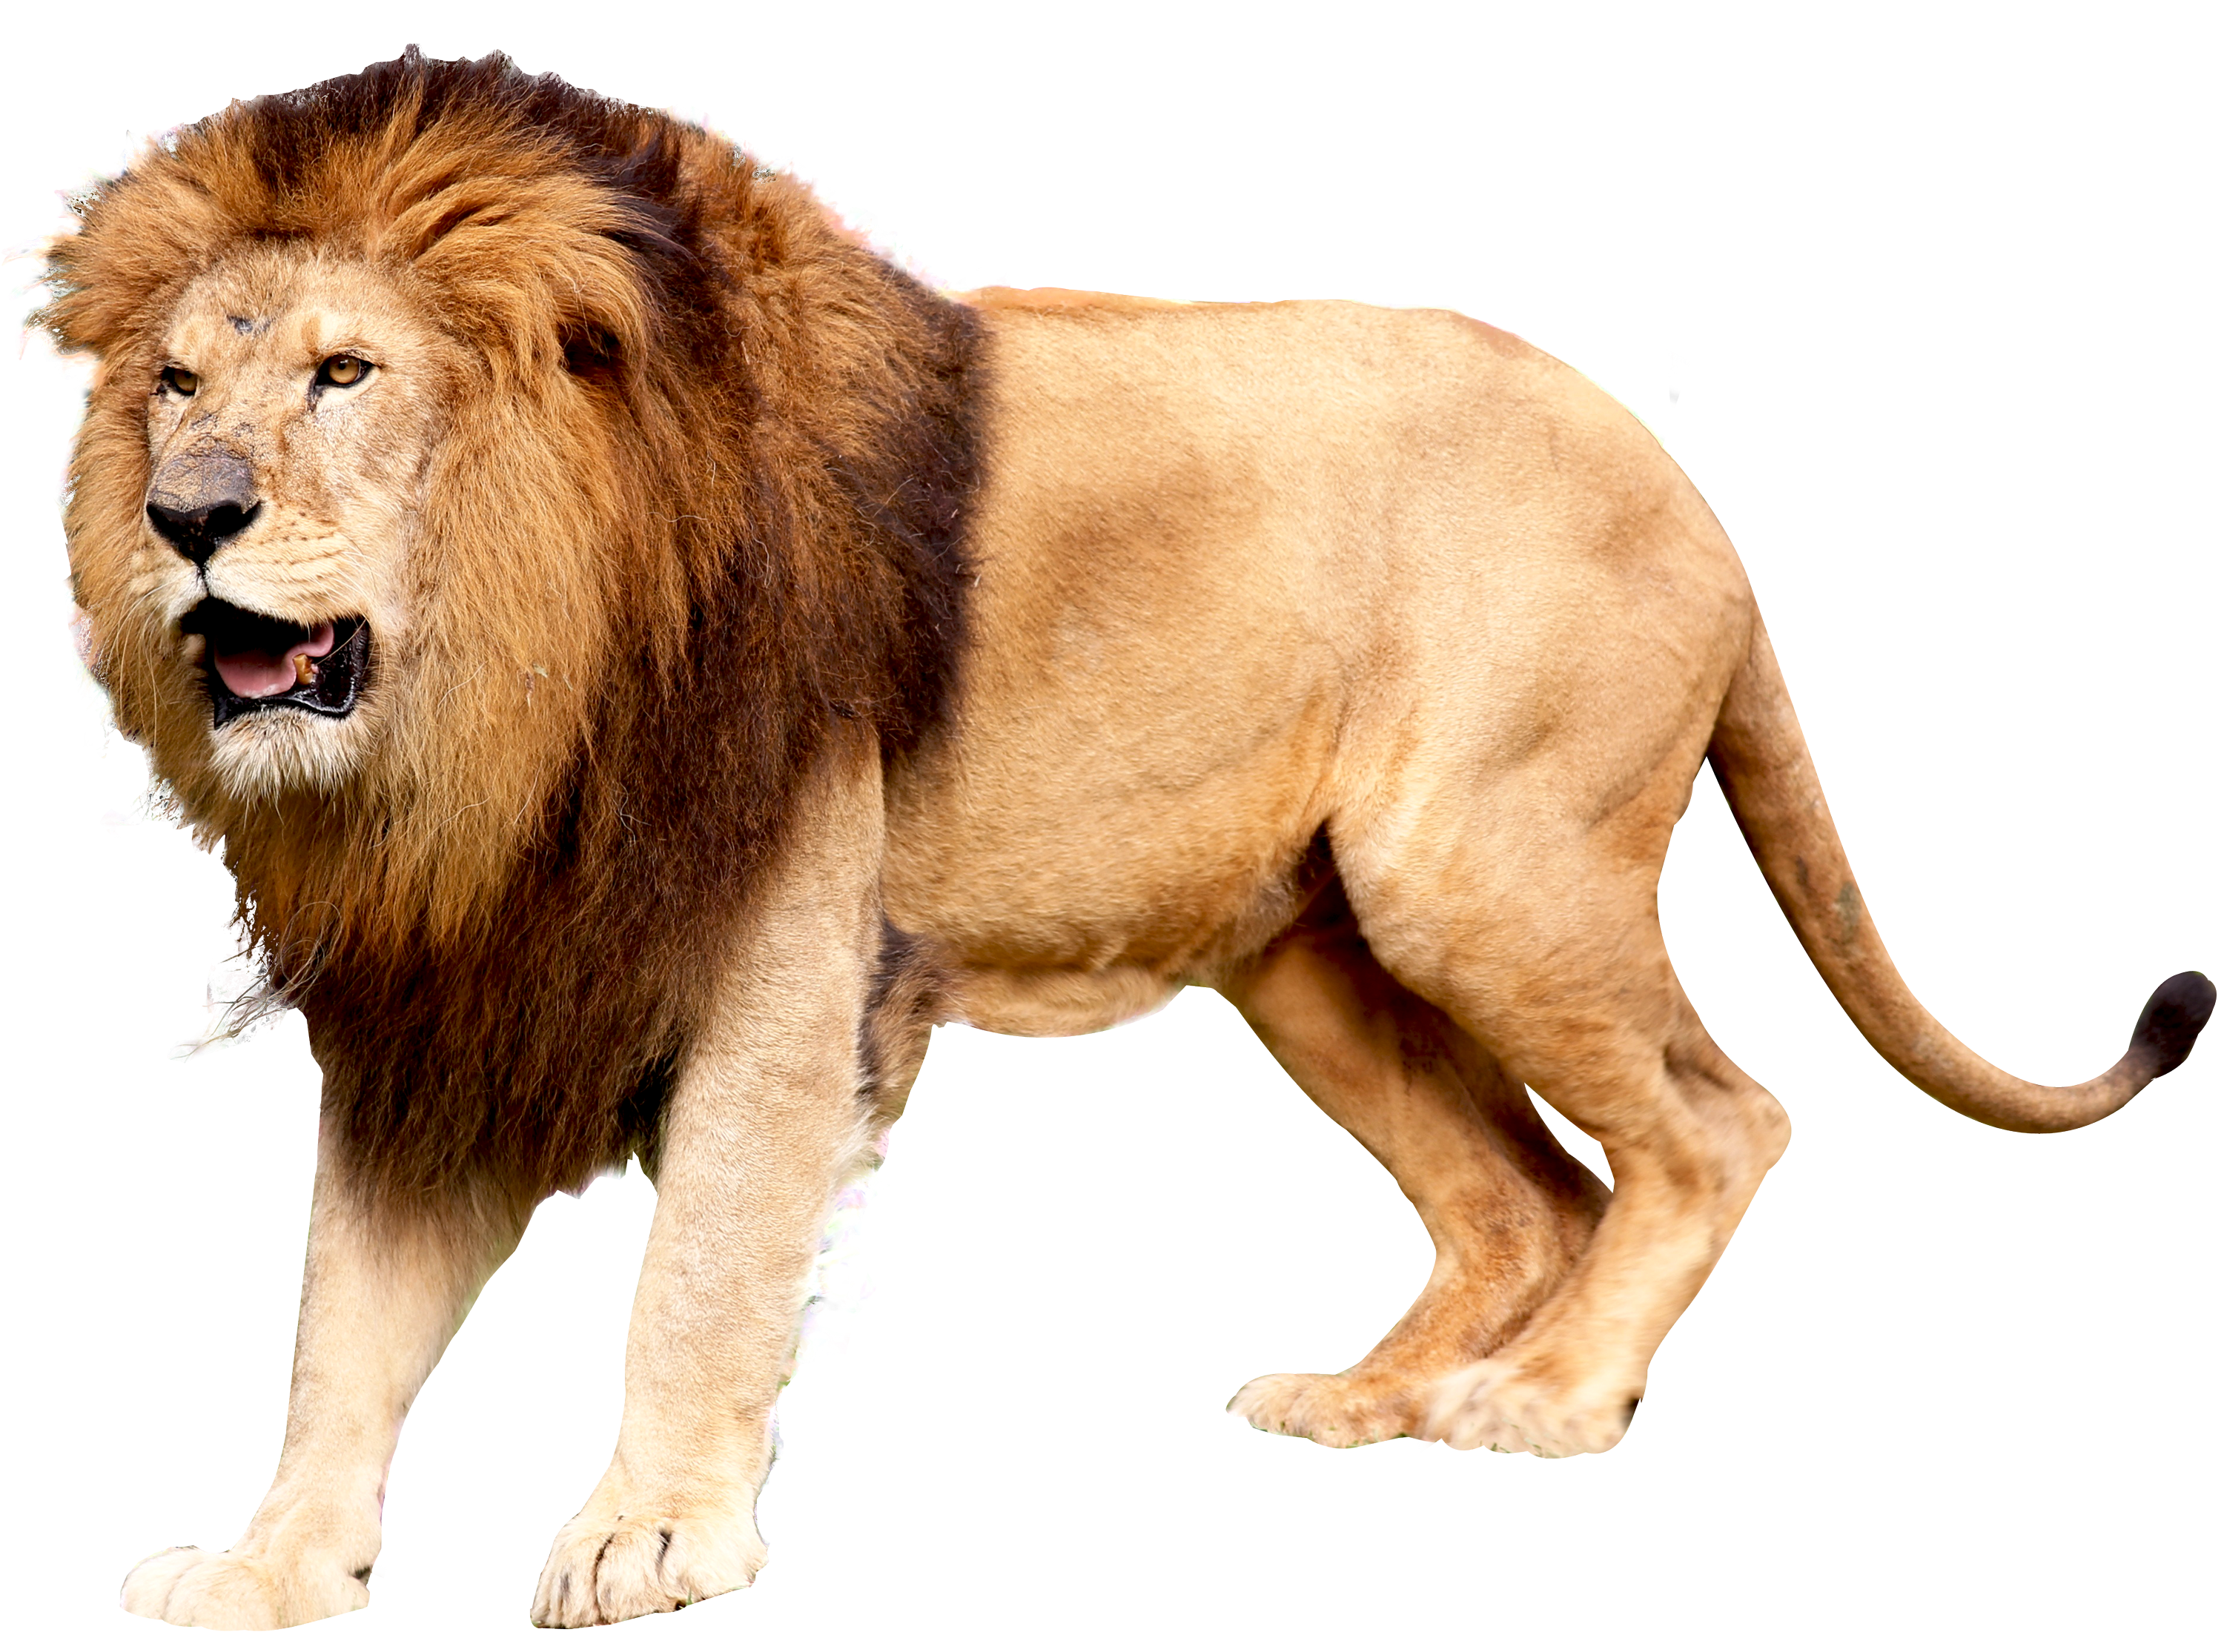 Lion roaring PNG Image - Pure